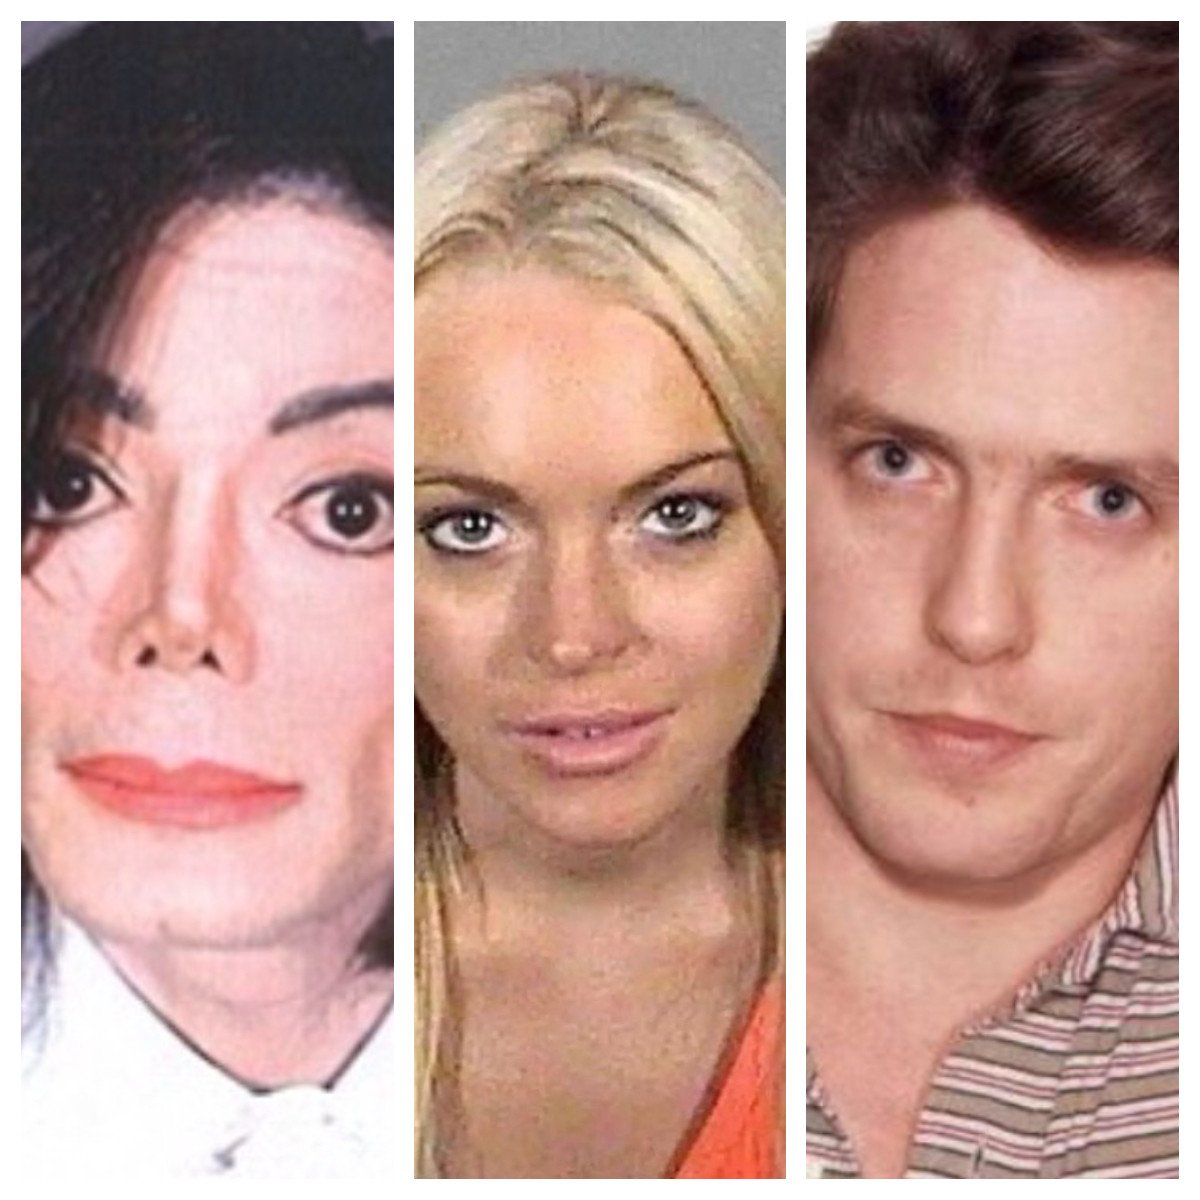 Michael Jackson, Lindsay Lohan and Hugh Grant all got arrested at one point or another. Photos: @celeb_mugshots, @borninfluenced, @photos.from.history/Instagram